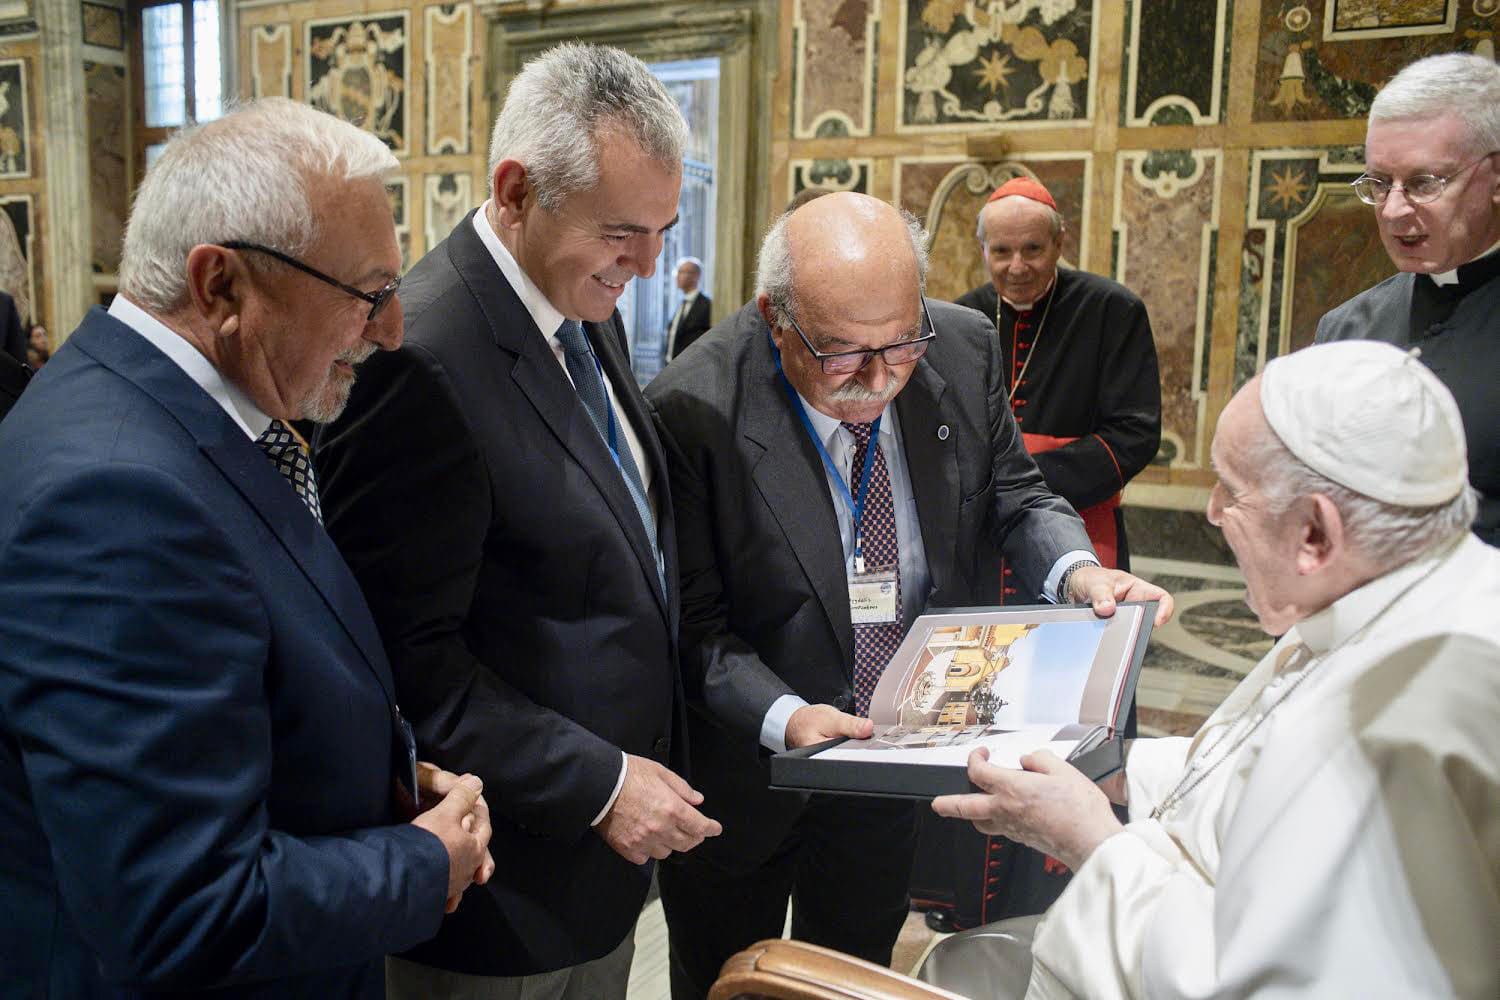 Rome, 28 August 2022. Offering the Volume «Hagia Sophia: The Churches of the Wisdom of God around the World» to His All Holiness Pope Francis